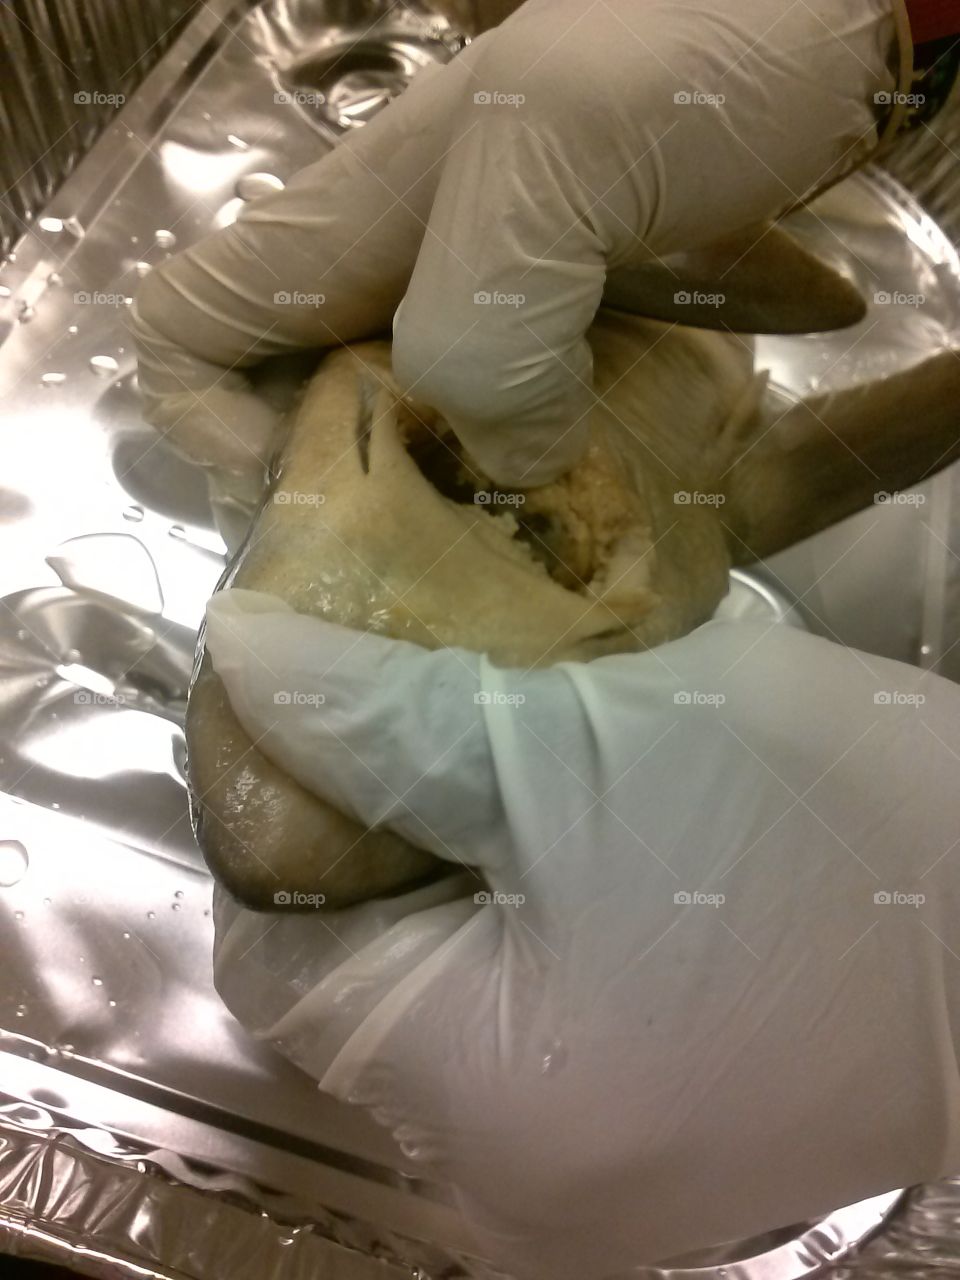 Dissection of a shark. I was dissecting a shark